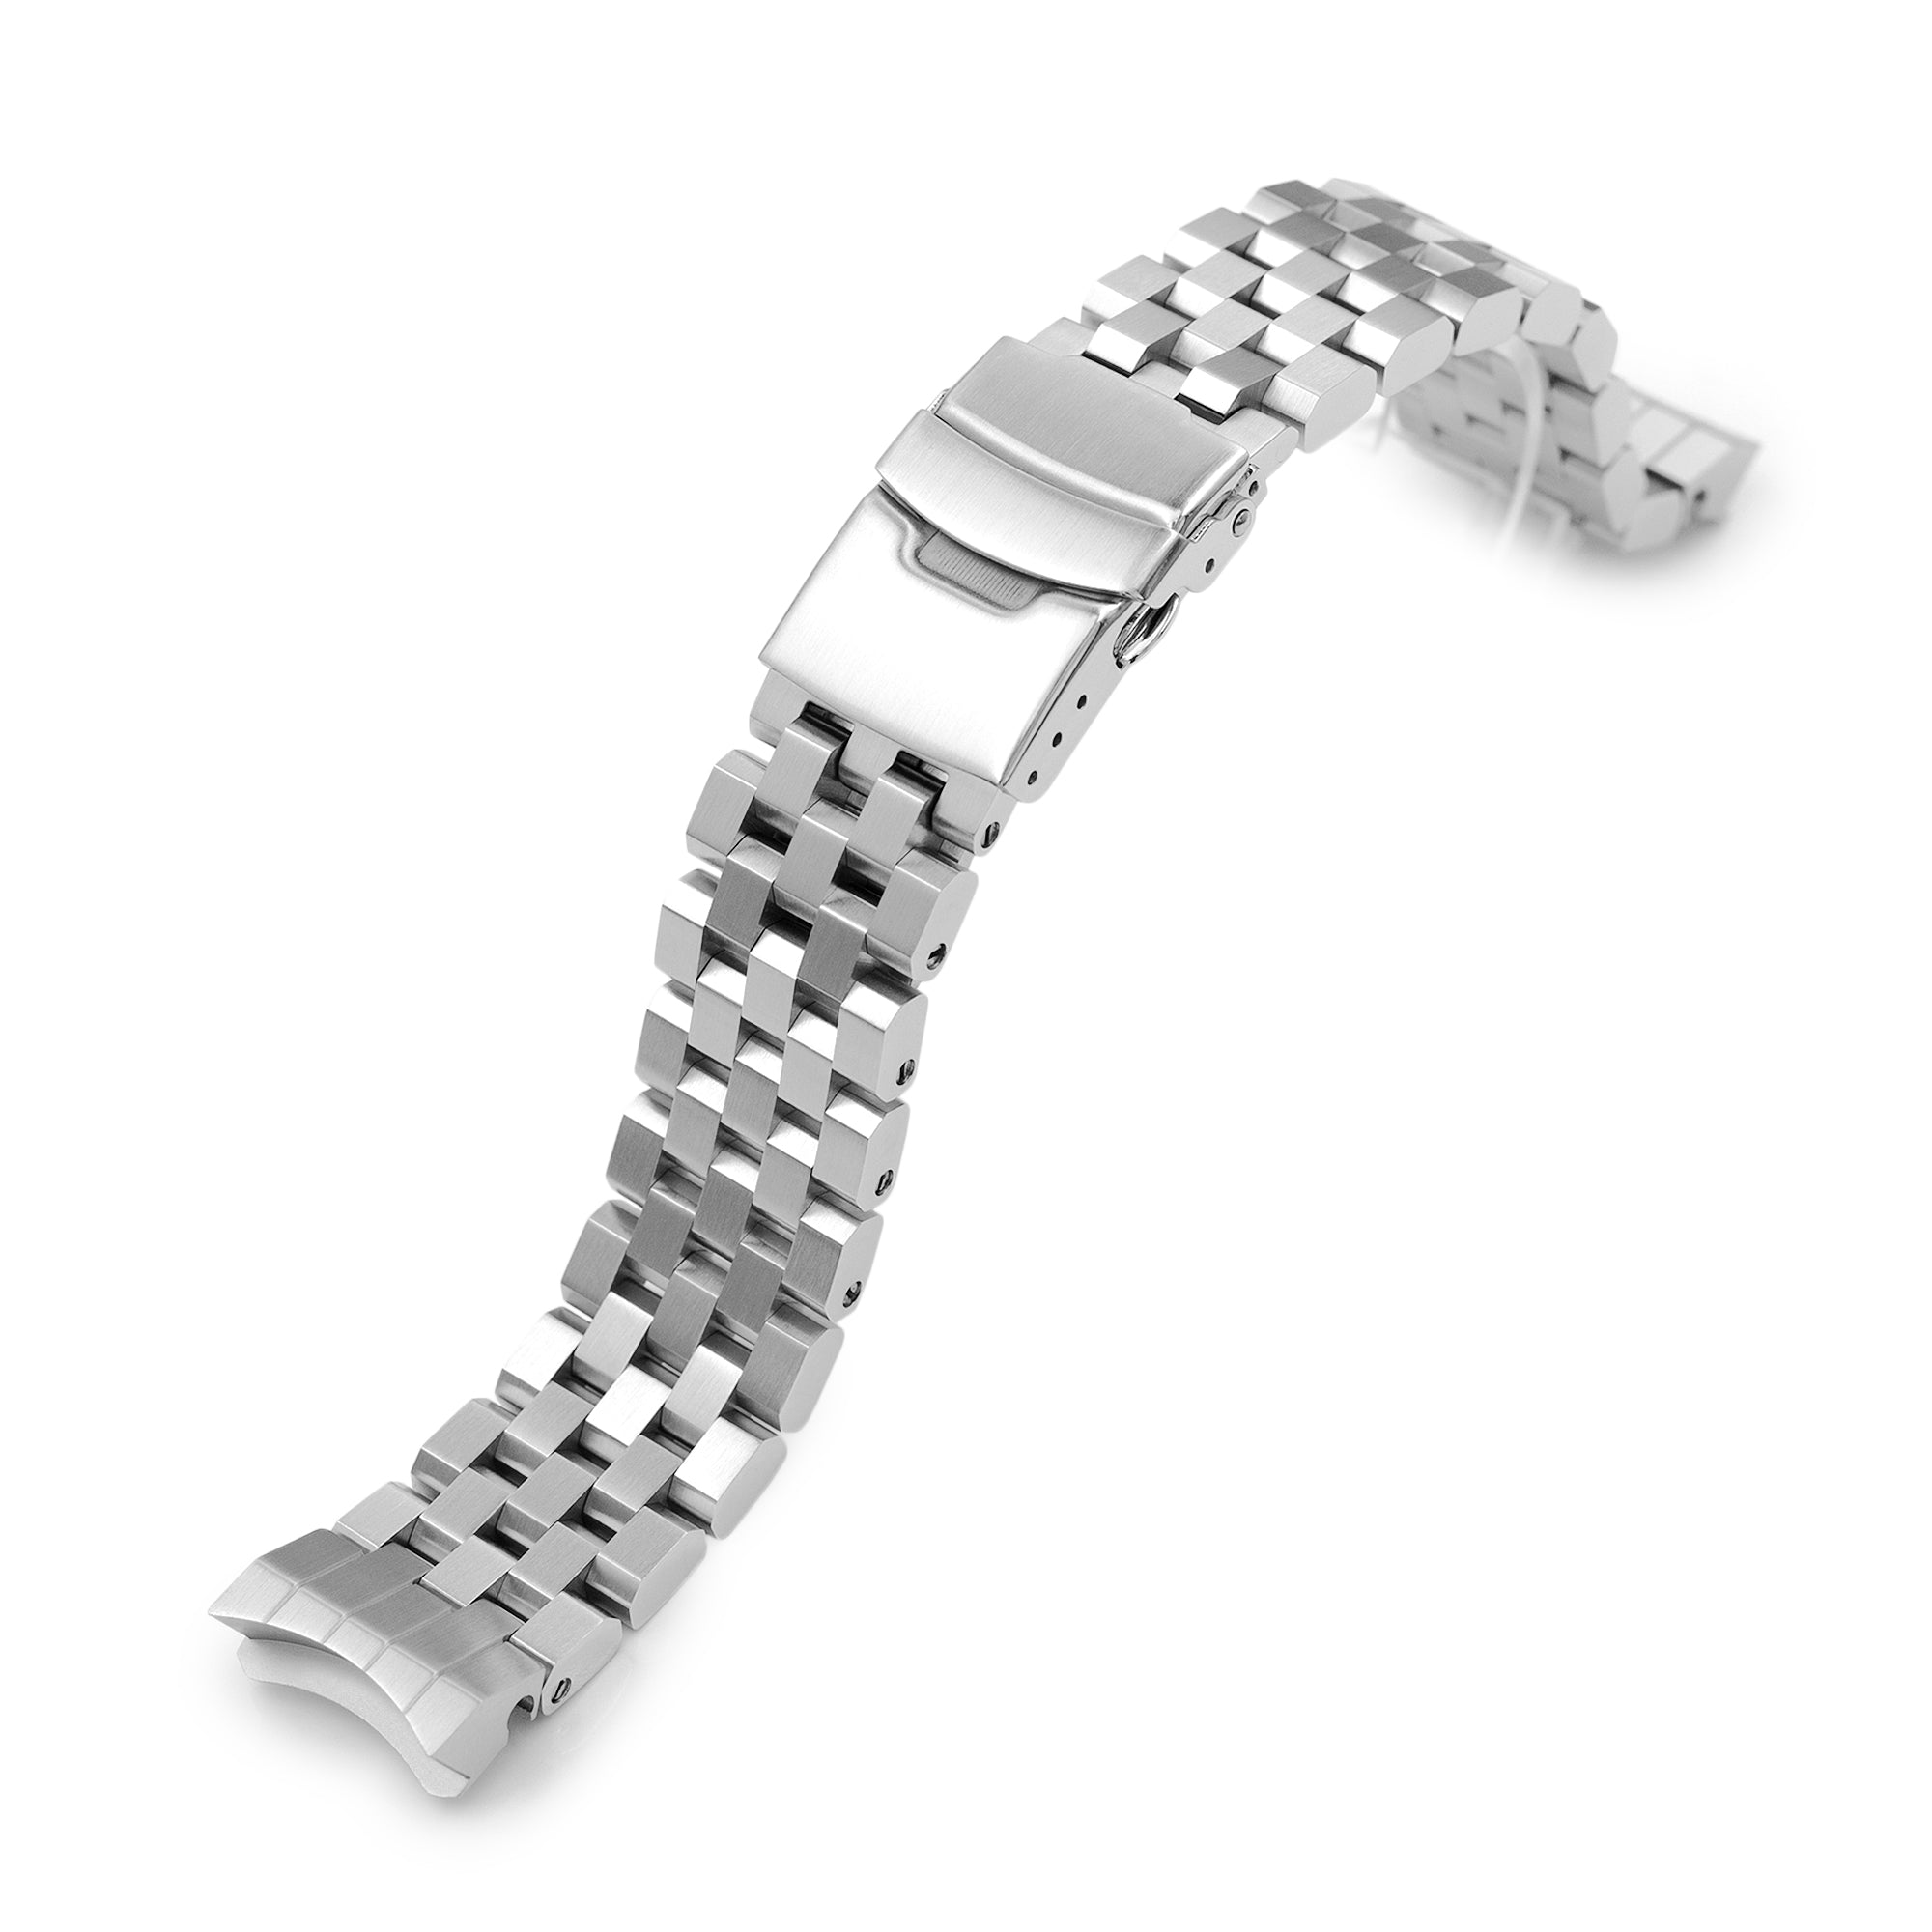 20mm Super Engineer II Watch Band compatible with Seiko Sumo SBDC001, SBDC031 & SPB101